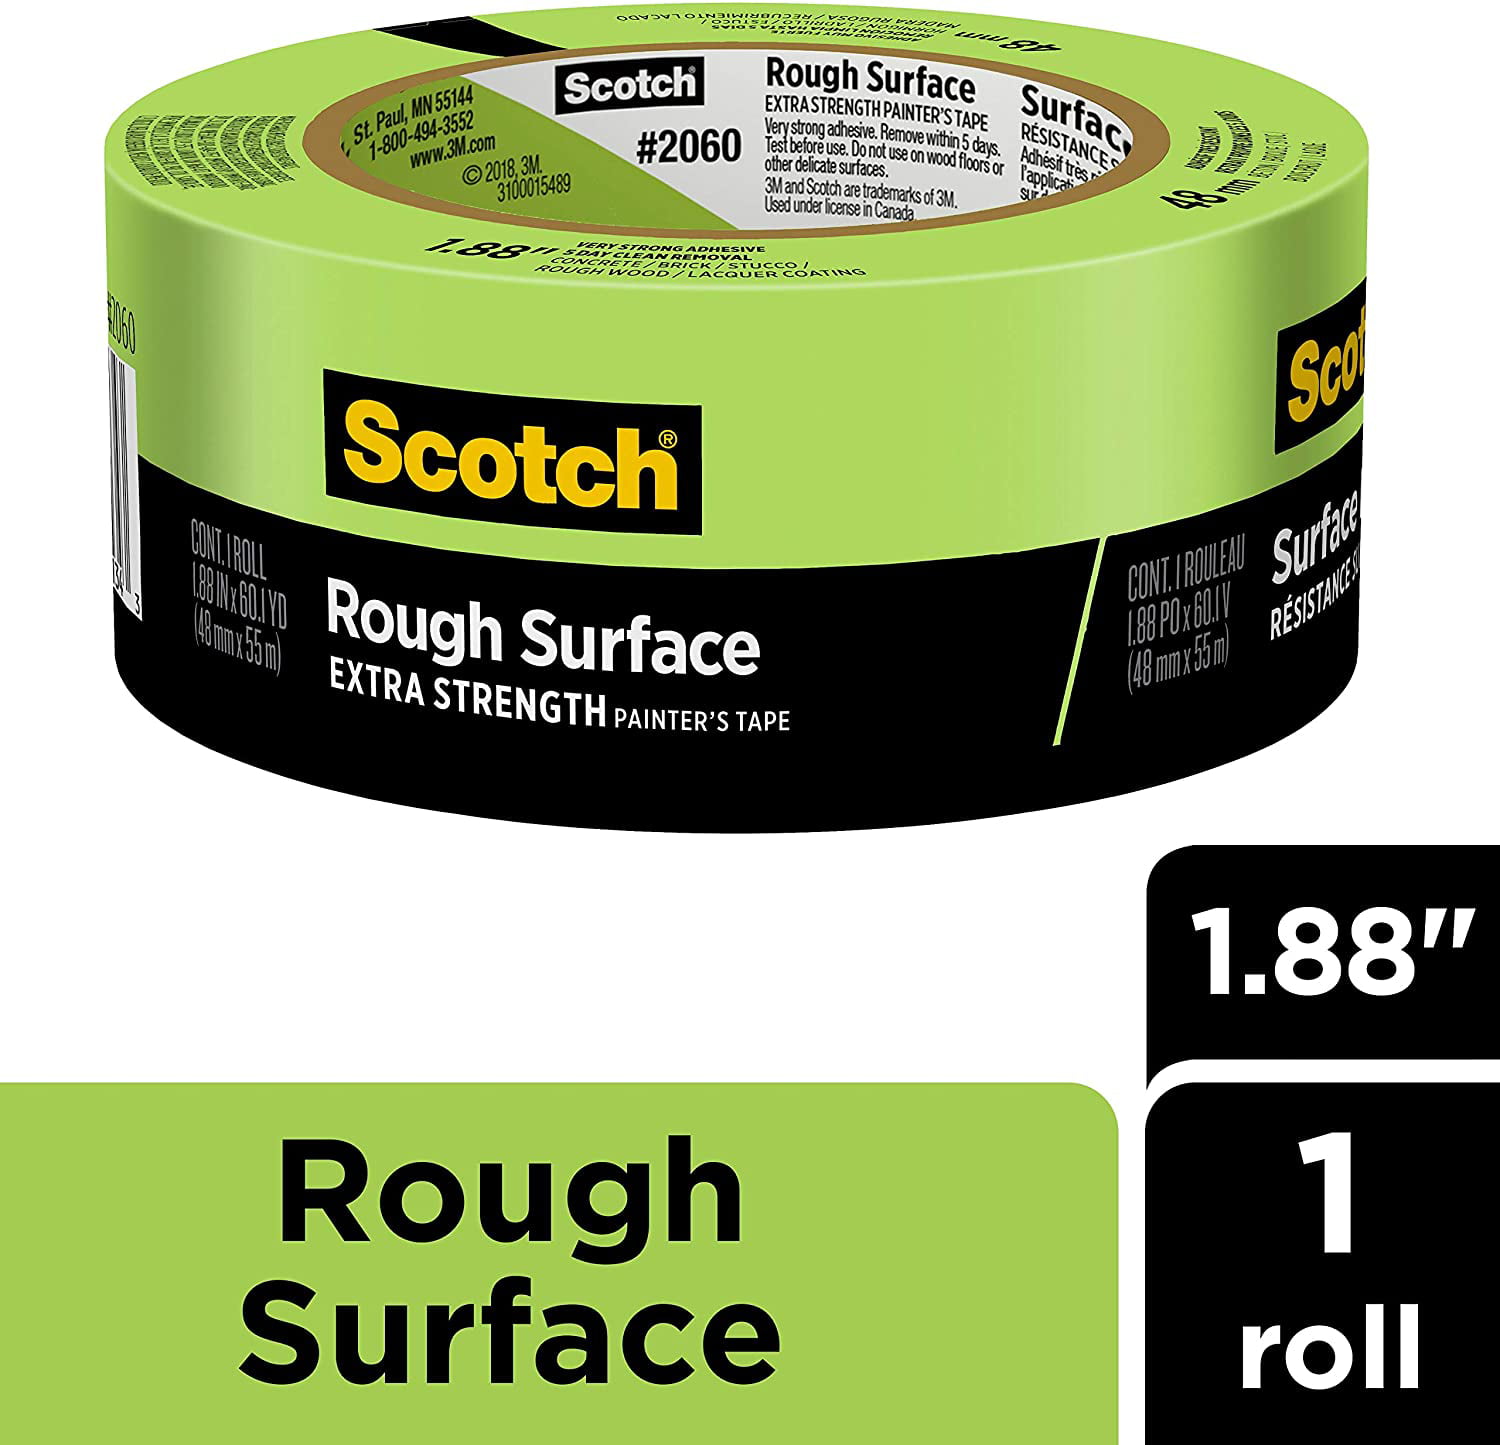 General Scotch® Masking Tape for Professional Painting 24 mm x 55 m Green 6 Rolls,2055PCW -24CP